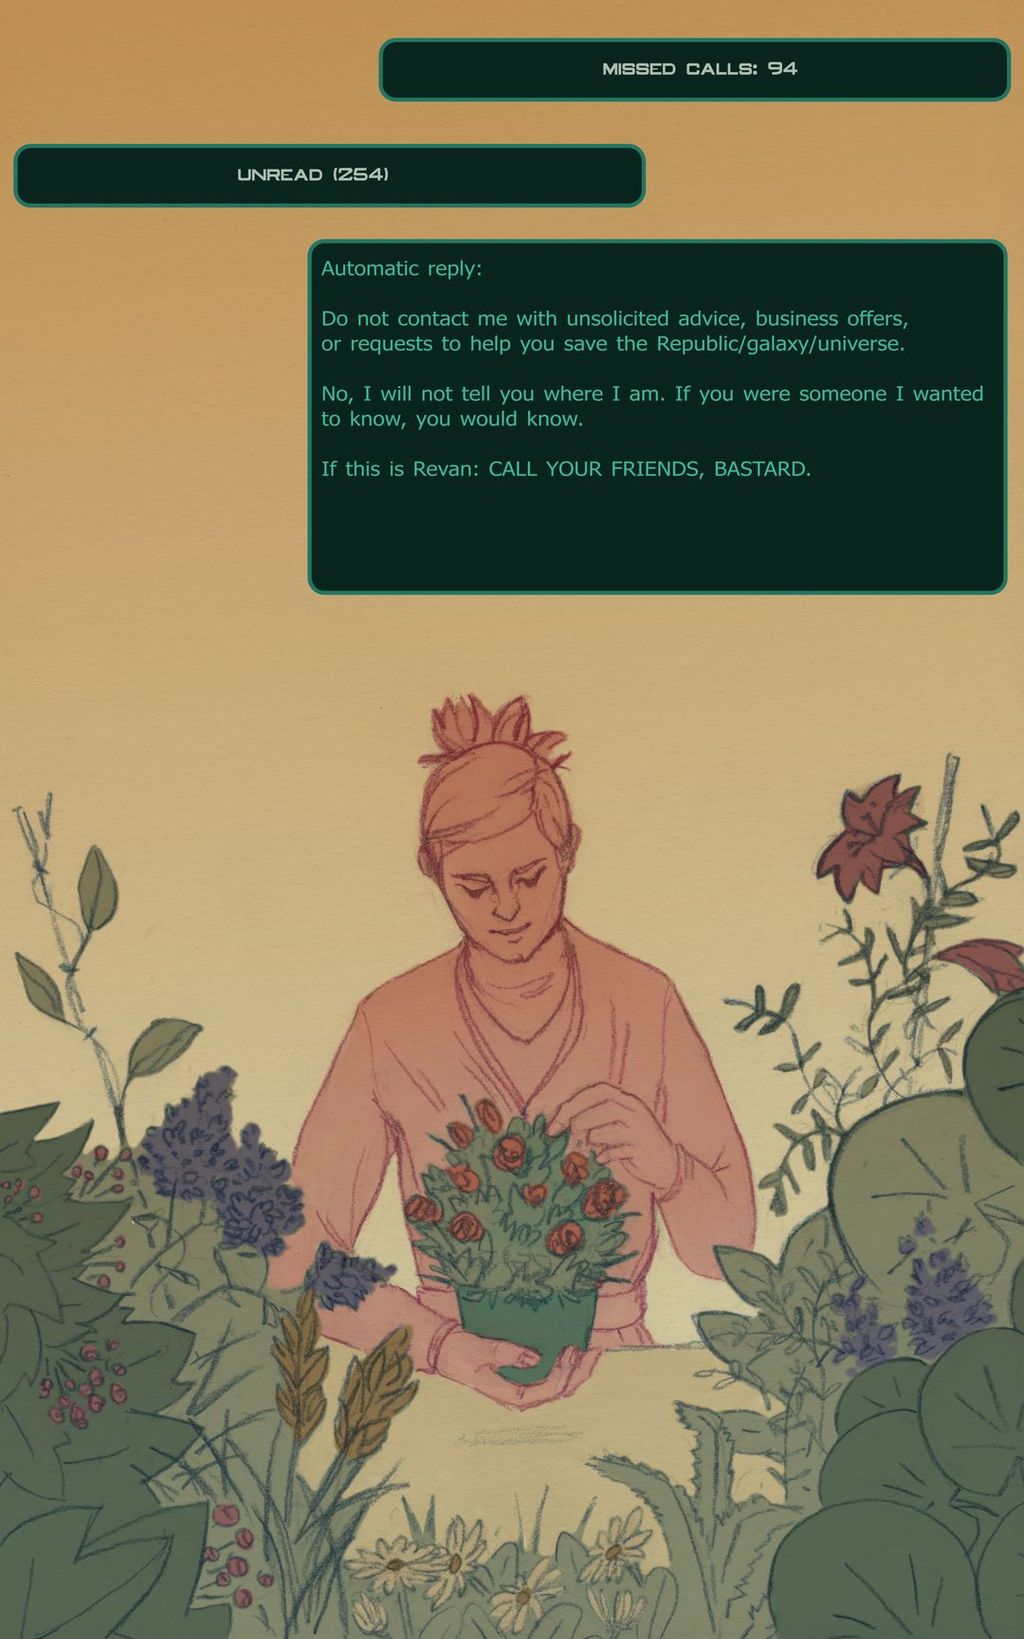 Digitally colorized color pencil drawing. It shows a woman in a vaguely Jedi clothing. She holds a flowerpot and is framed by flowers and climbing vines on both sides. Above her are blocks of text (transcript below).